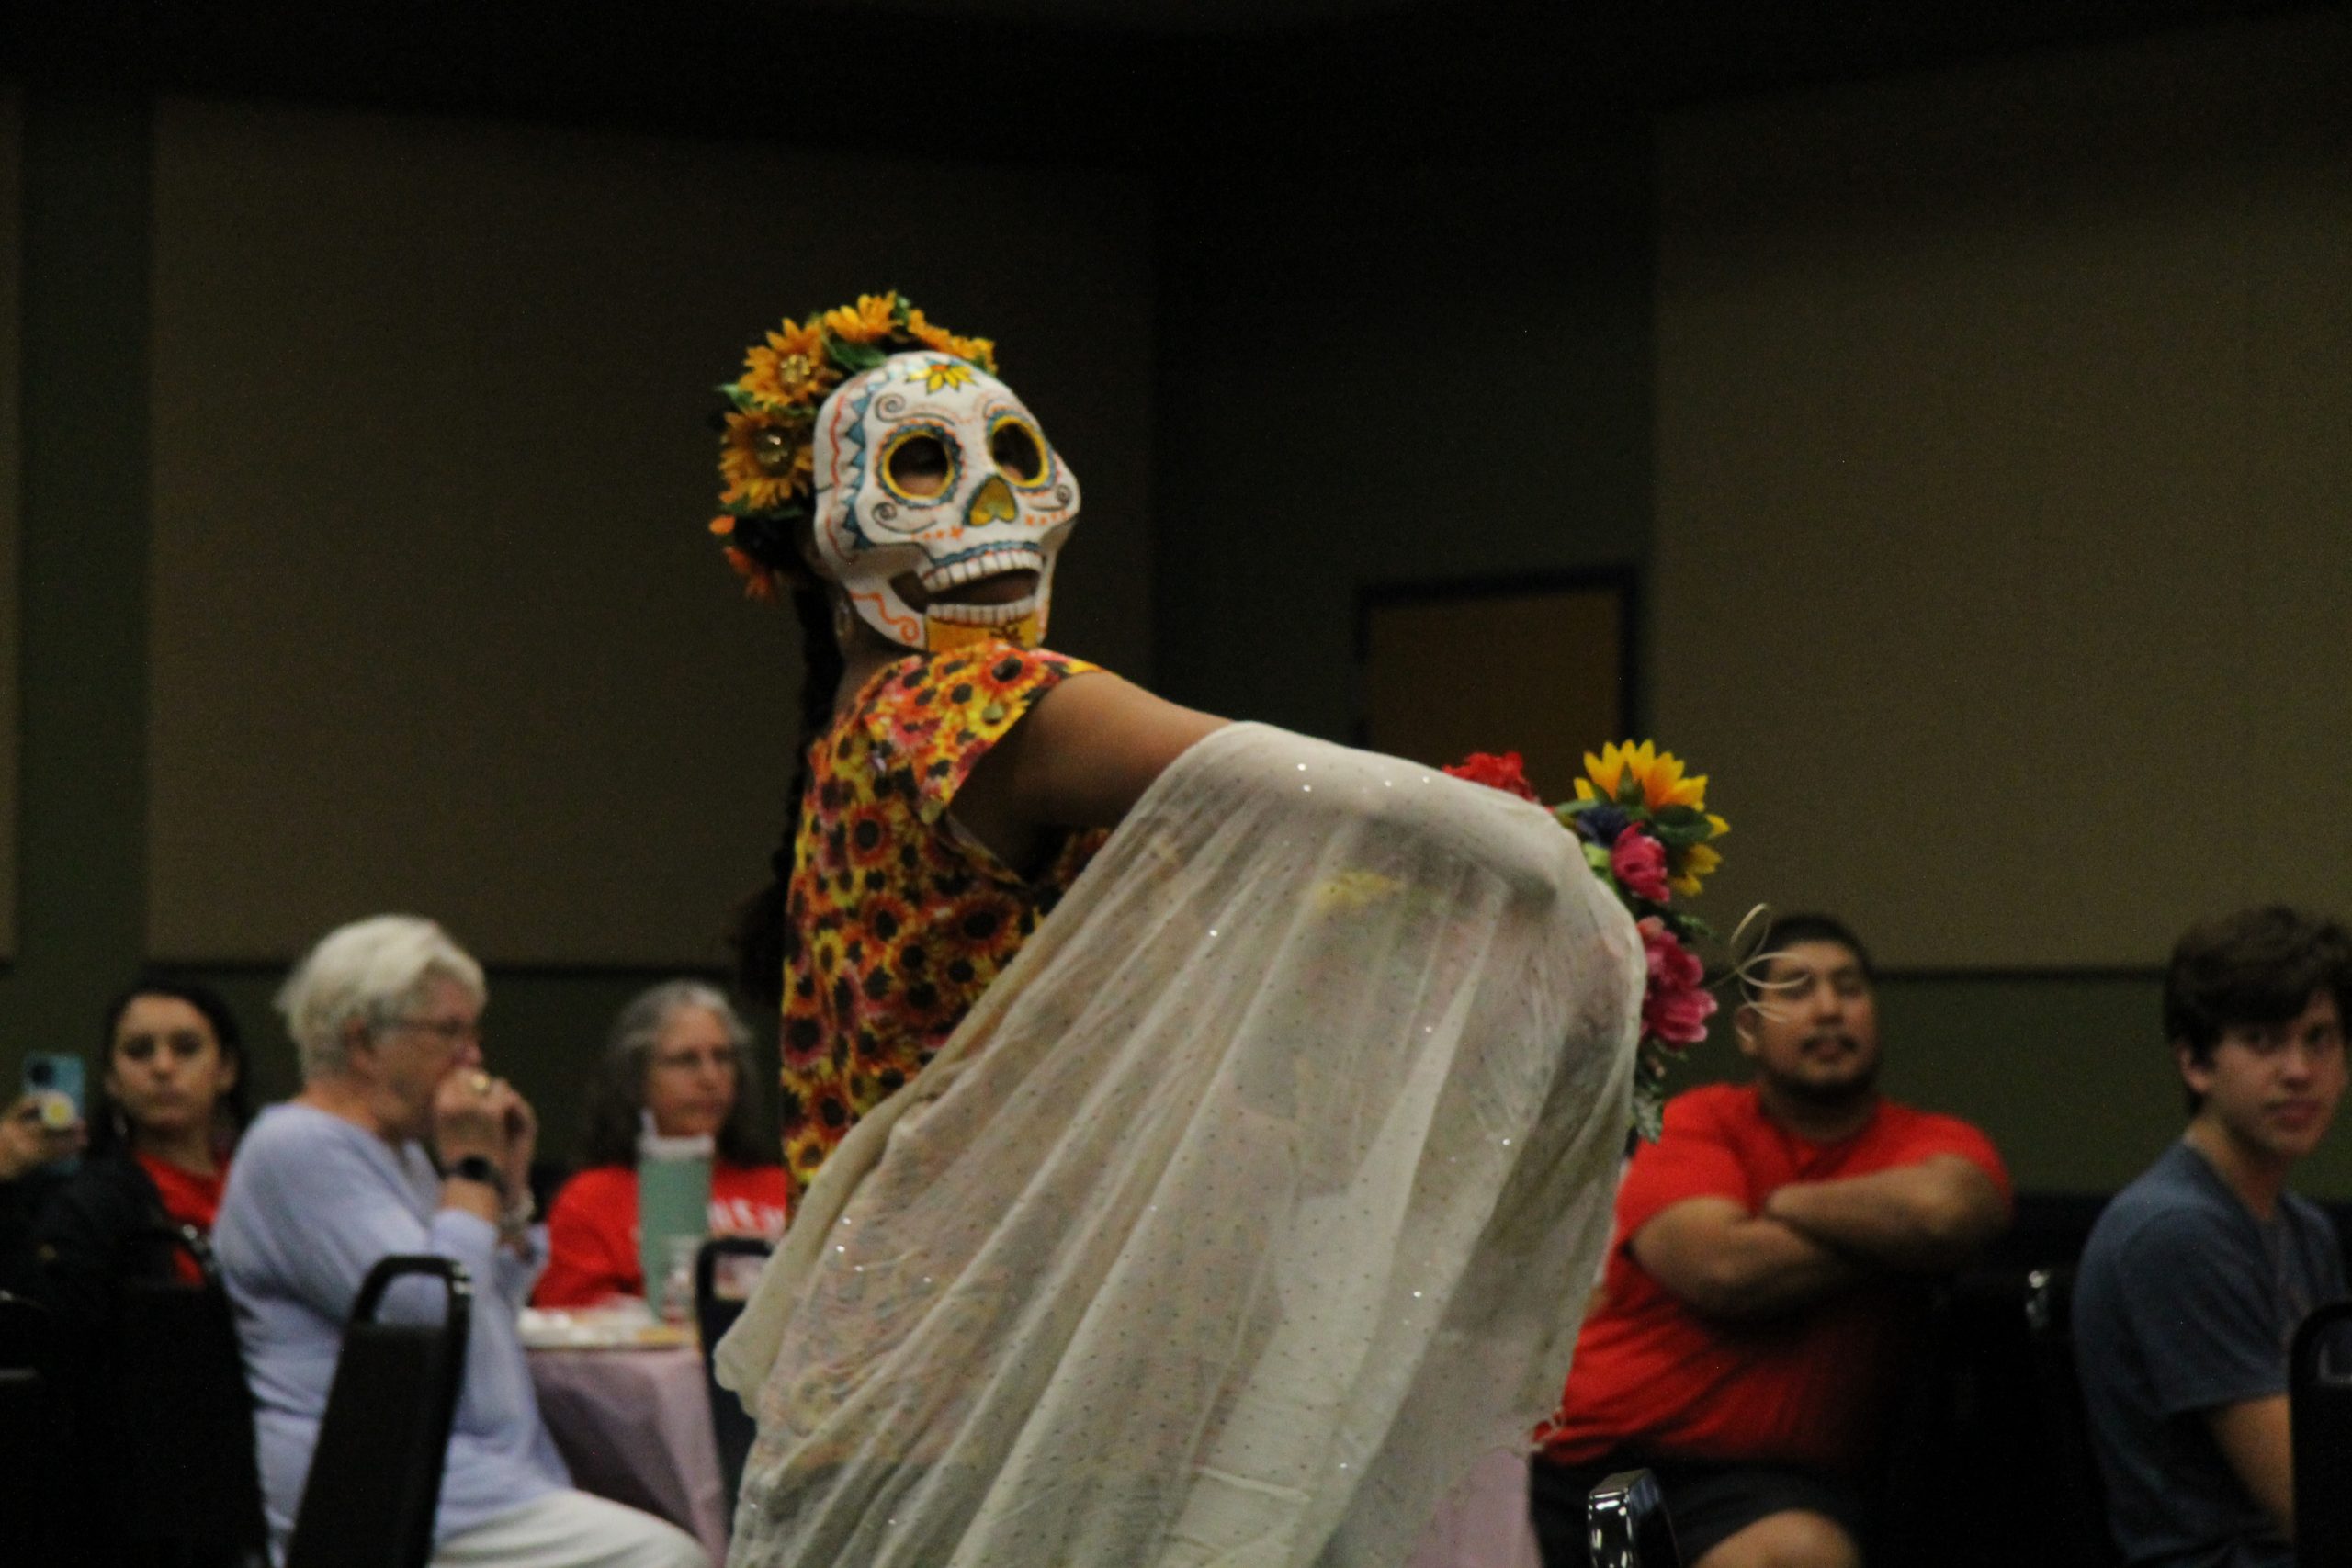 DMC honors Hispanic Heritage Month with onsite performance